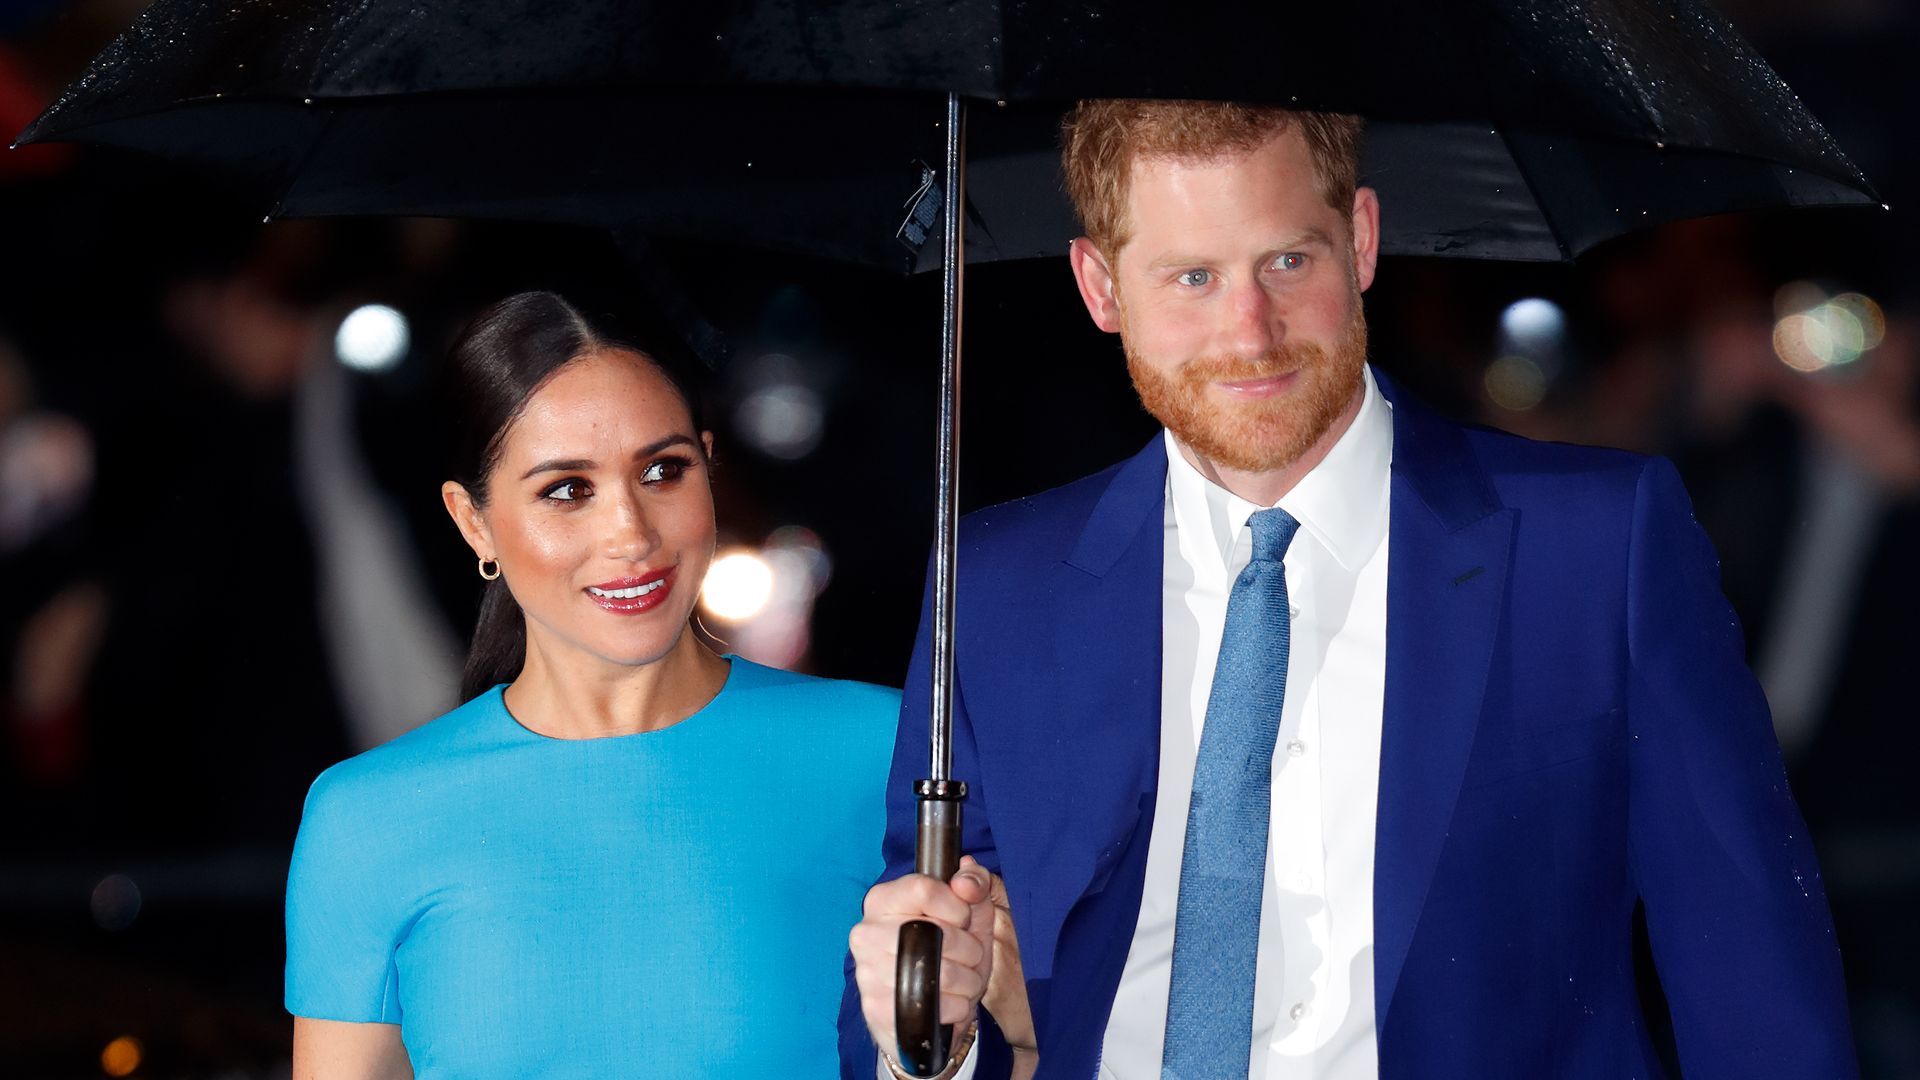 The Duke and Duchess of Sussex stepped back from royal duties in 2020